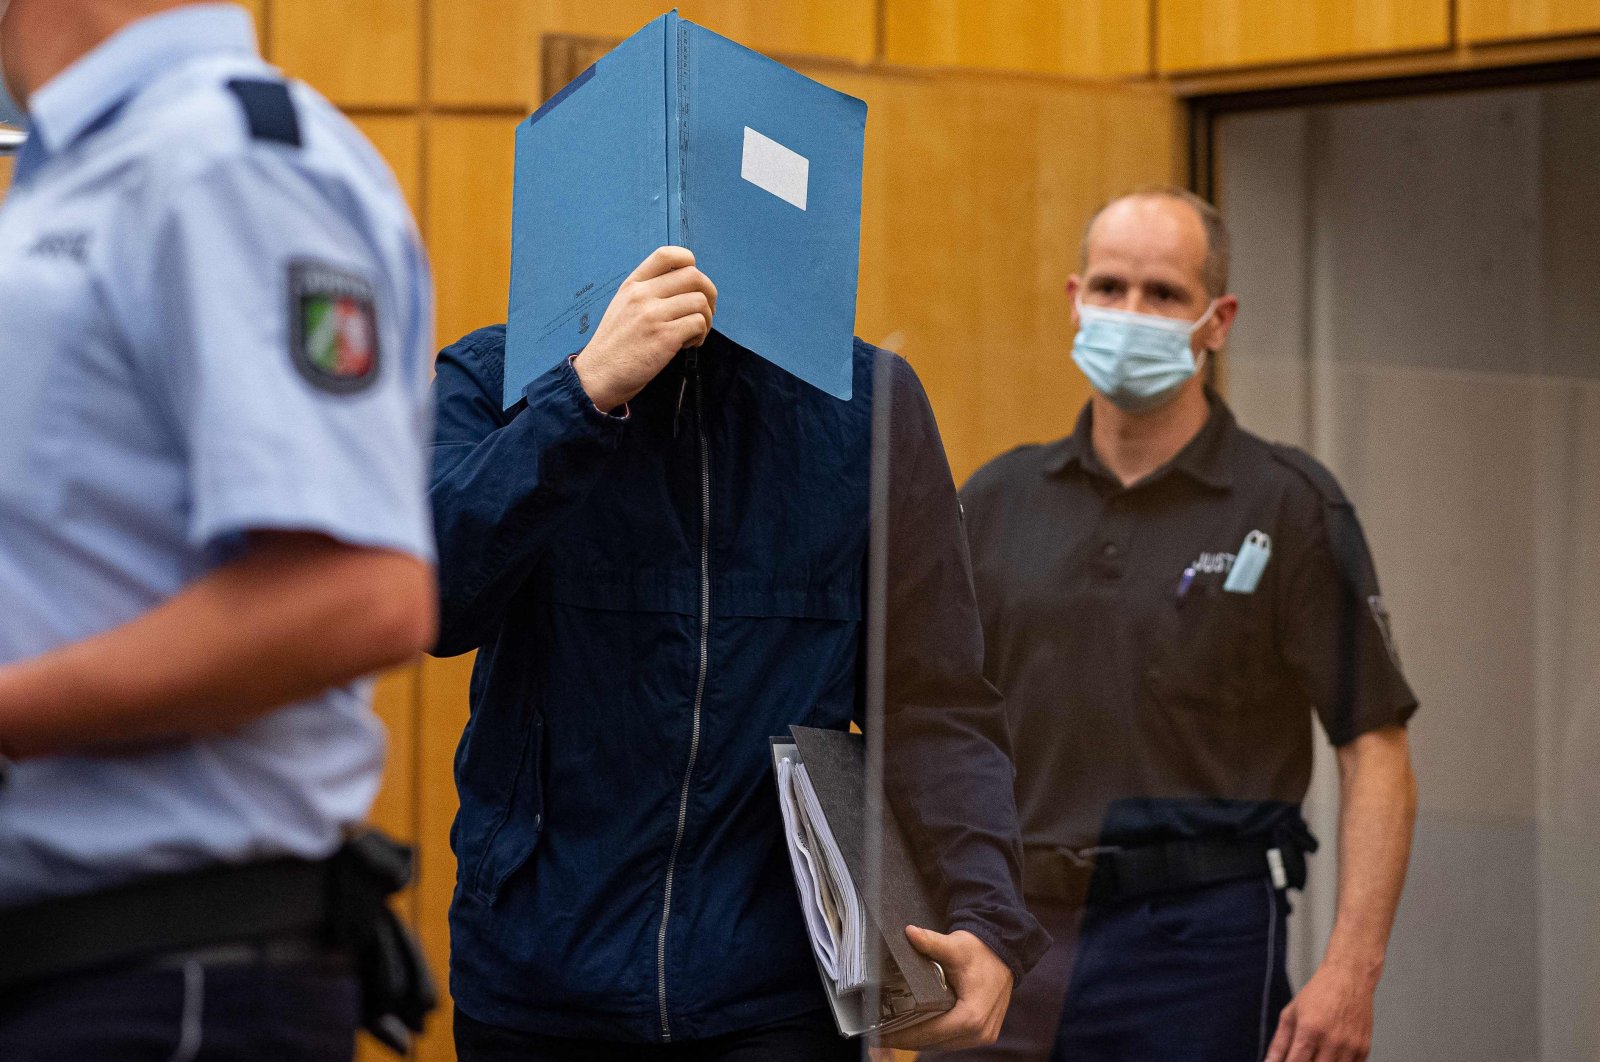 The main defendant (C) hides his face behind a folder as he arrives for his judgement in a child sex abuse case at court in Muenster, northwestern Germany, on July 6, 2021. (AFP Photo)